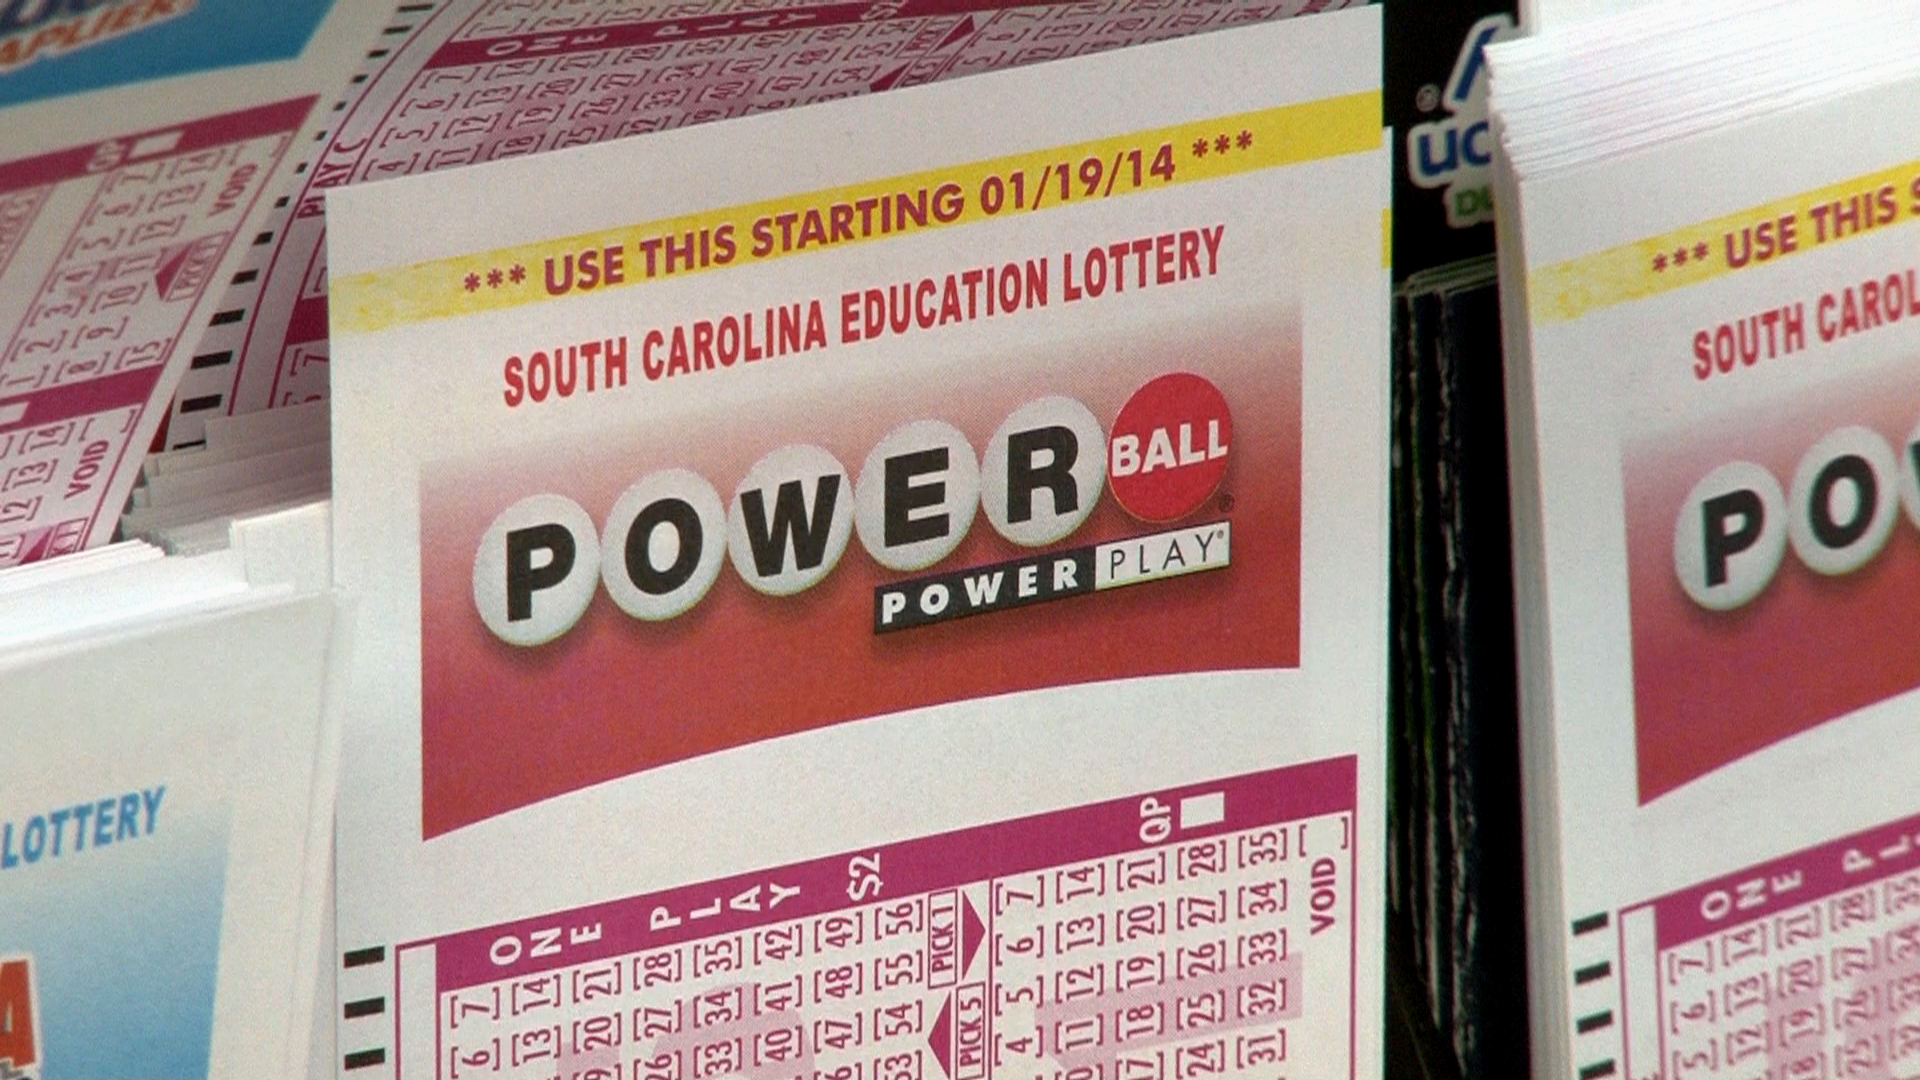 Check Your Powerball Tickets! $50K Unclaimed Ticket Sold In SC